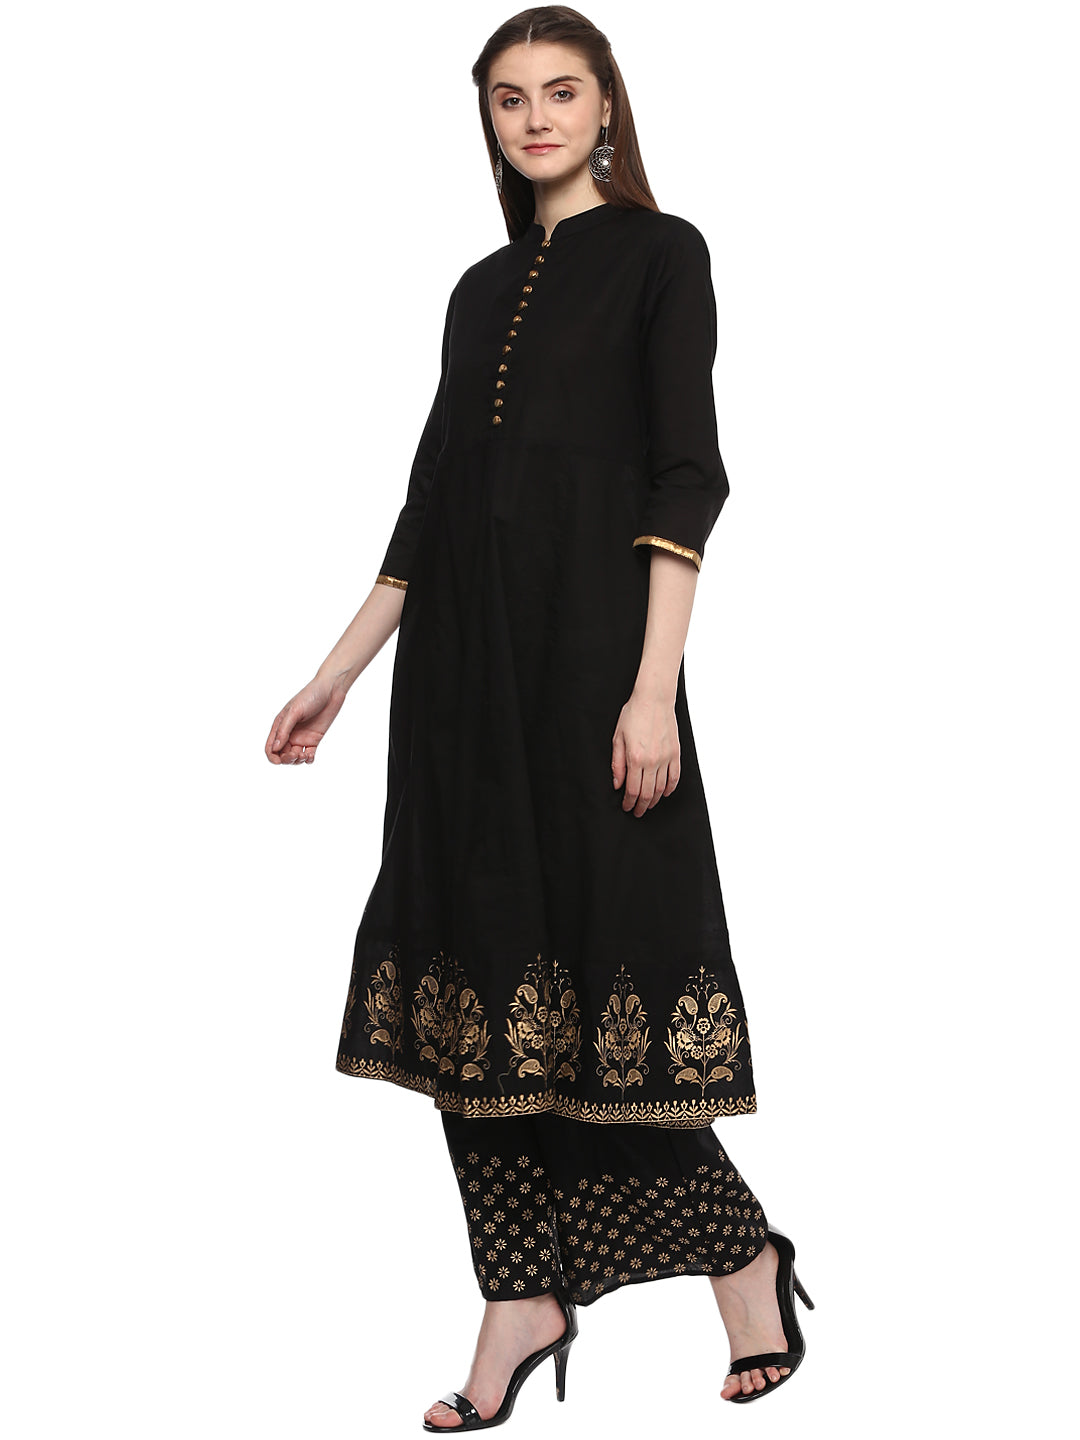 Black And Golden Solid Kurta With Palazzos.